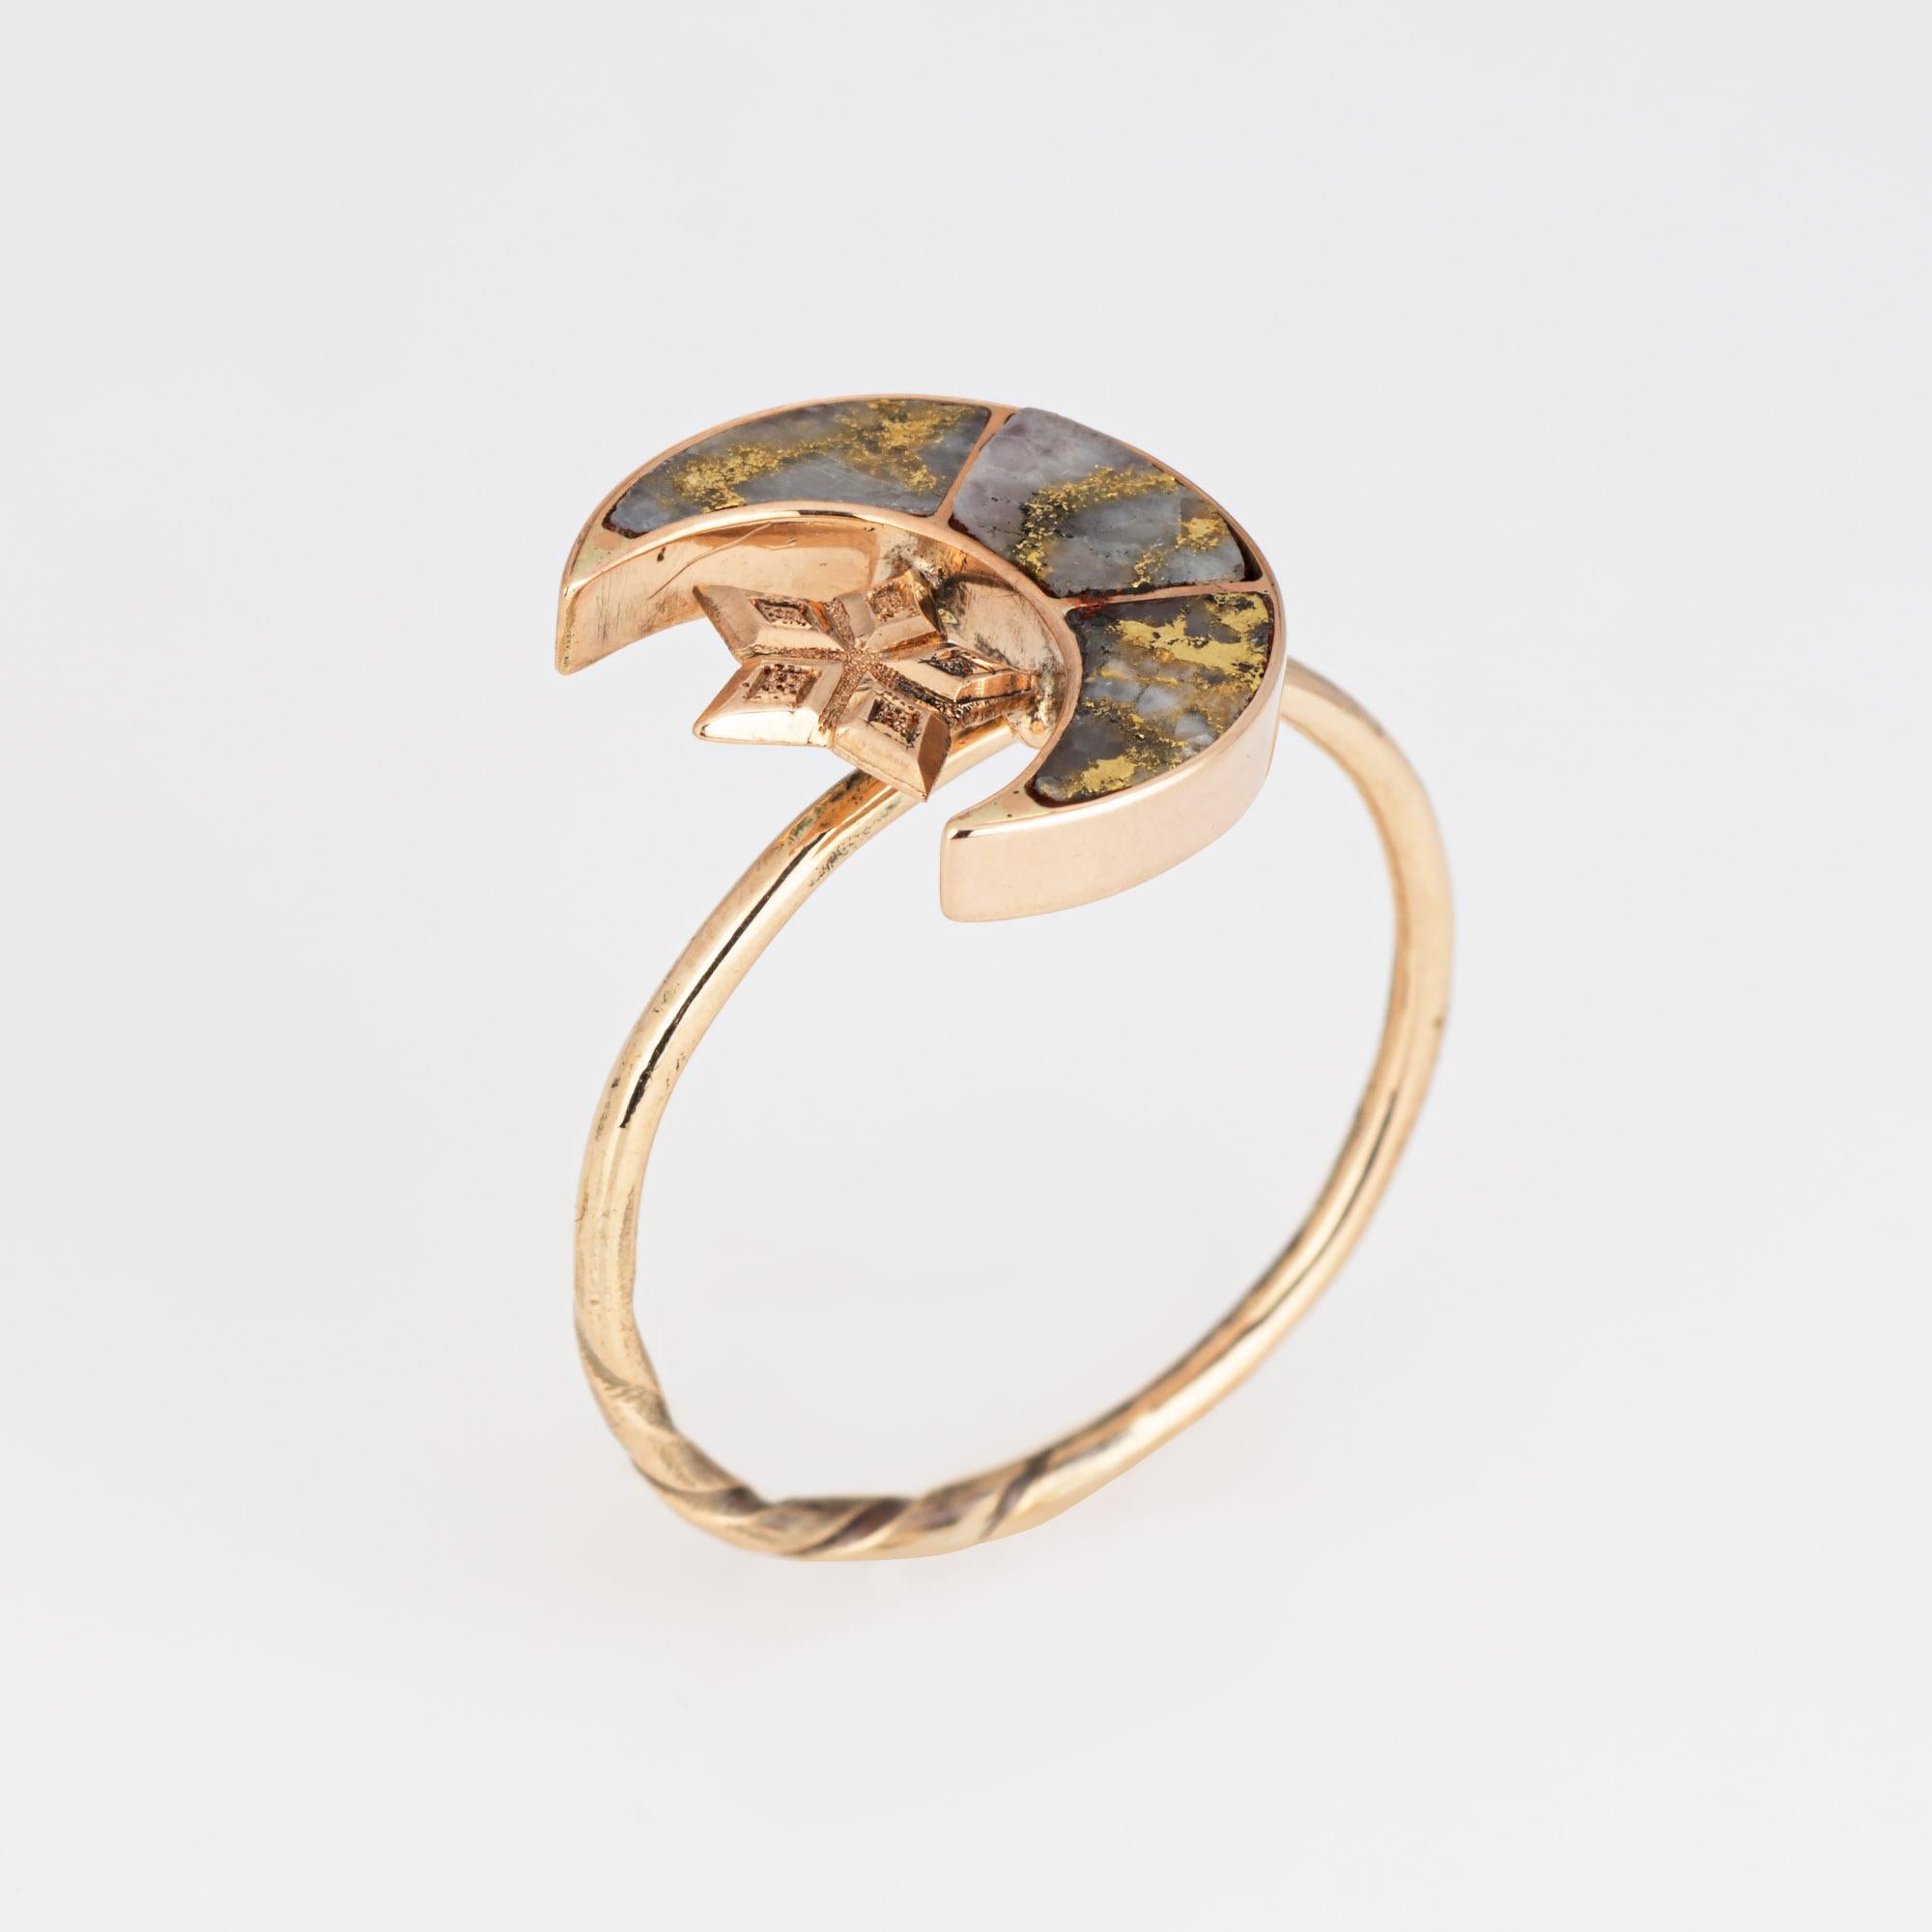 Originally an antique Victorian era stick pin (circa 1880s to 1900s), the Gold in Quartz ring is crafted in 14 karat rose gold.

The ring is mounted with the original stick pin. Our jeweler rounded the stick pin into a slim band for the finger. The